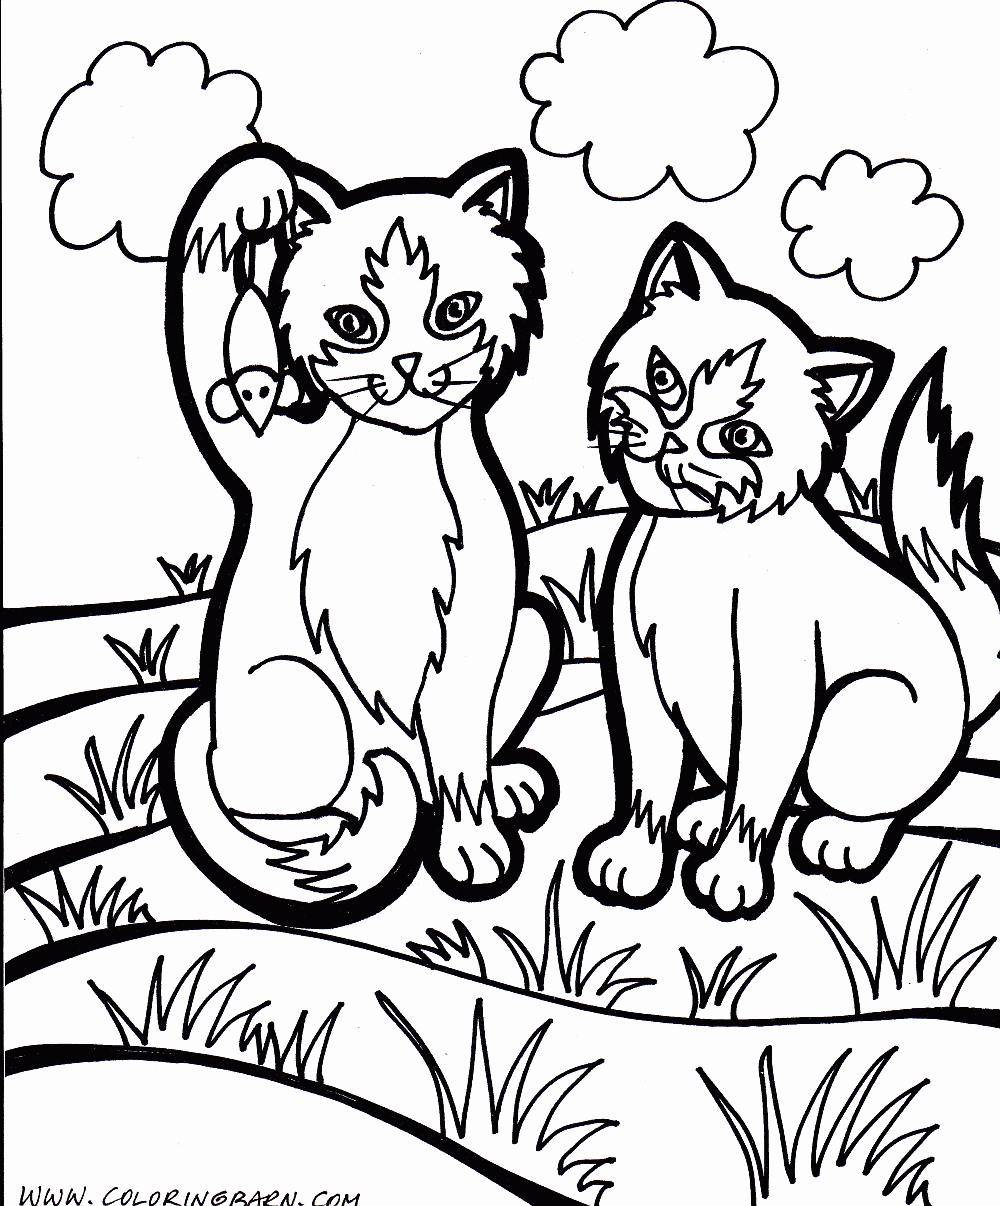 Cat Coloring Pages | Cats Coloring pages |Kitten Coloring pages | Cool cats | #24